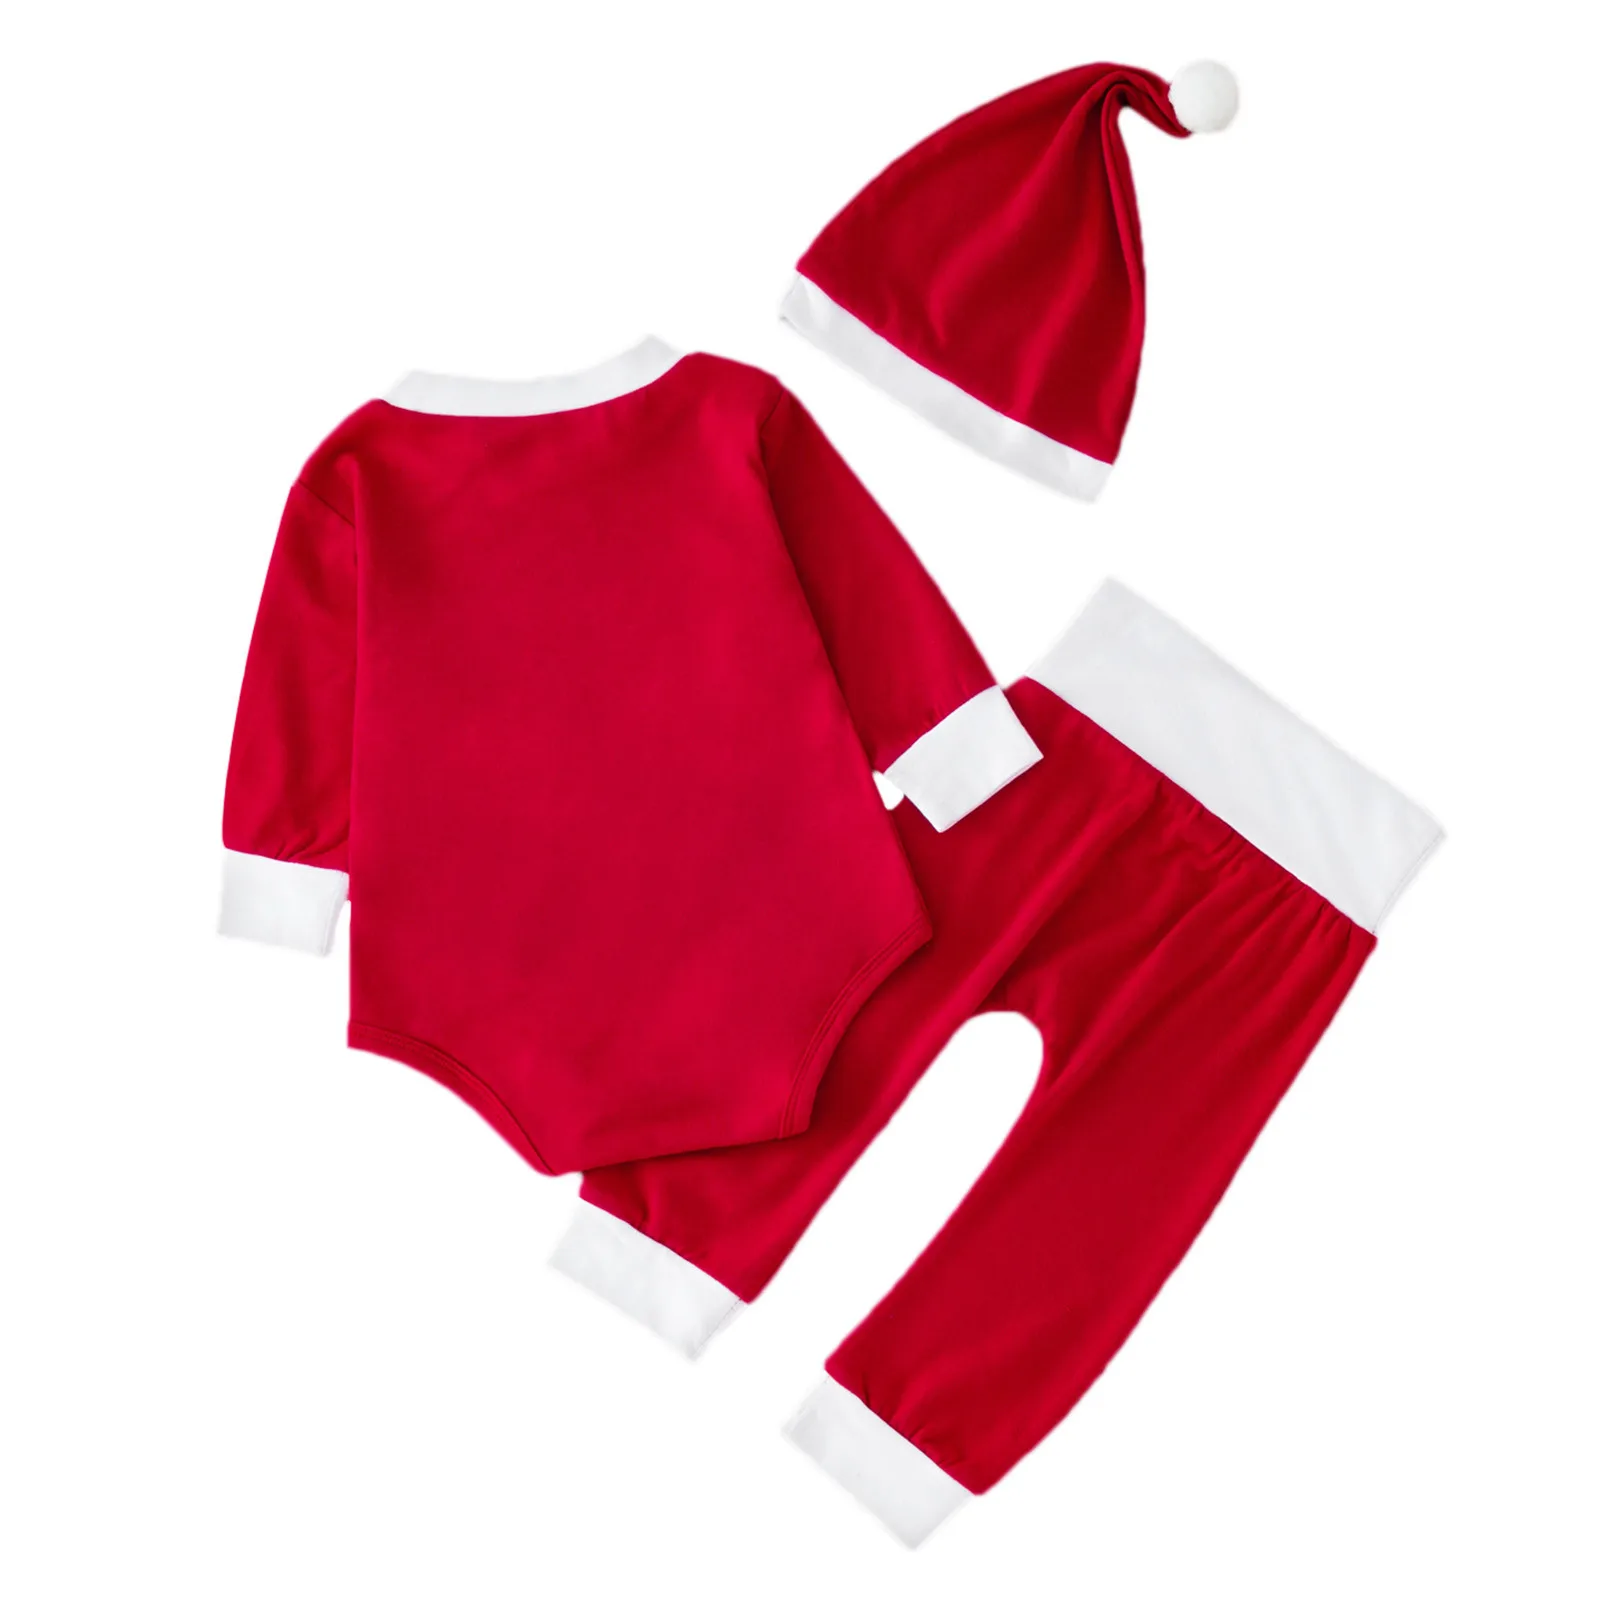 Infant Baby Boys Girls Christmas Deer Santa Xmas Letter Printed Romper Bodysuit And Pants Hat Pajamas Firetruck Clothes pajama sets button up	